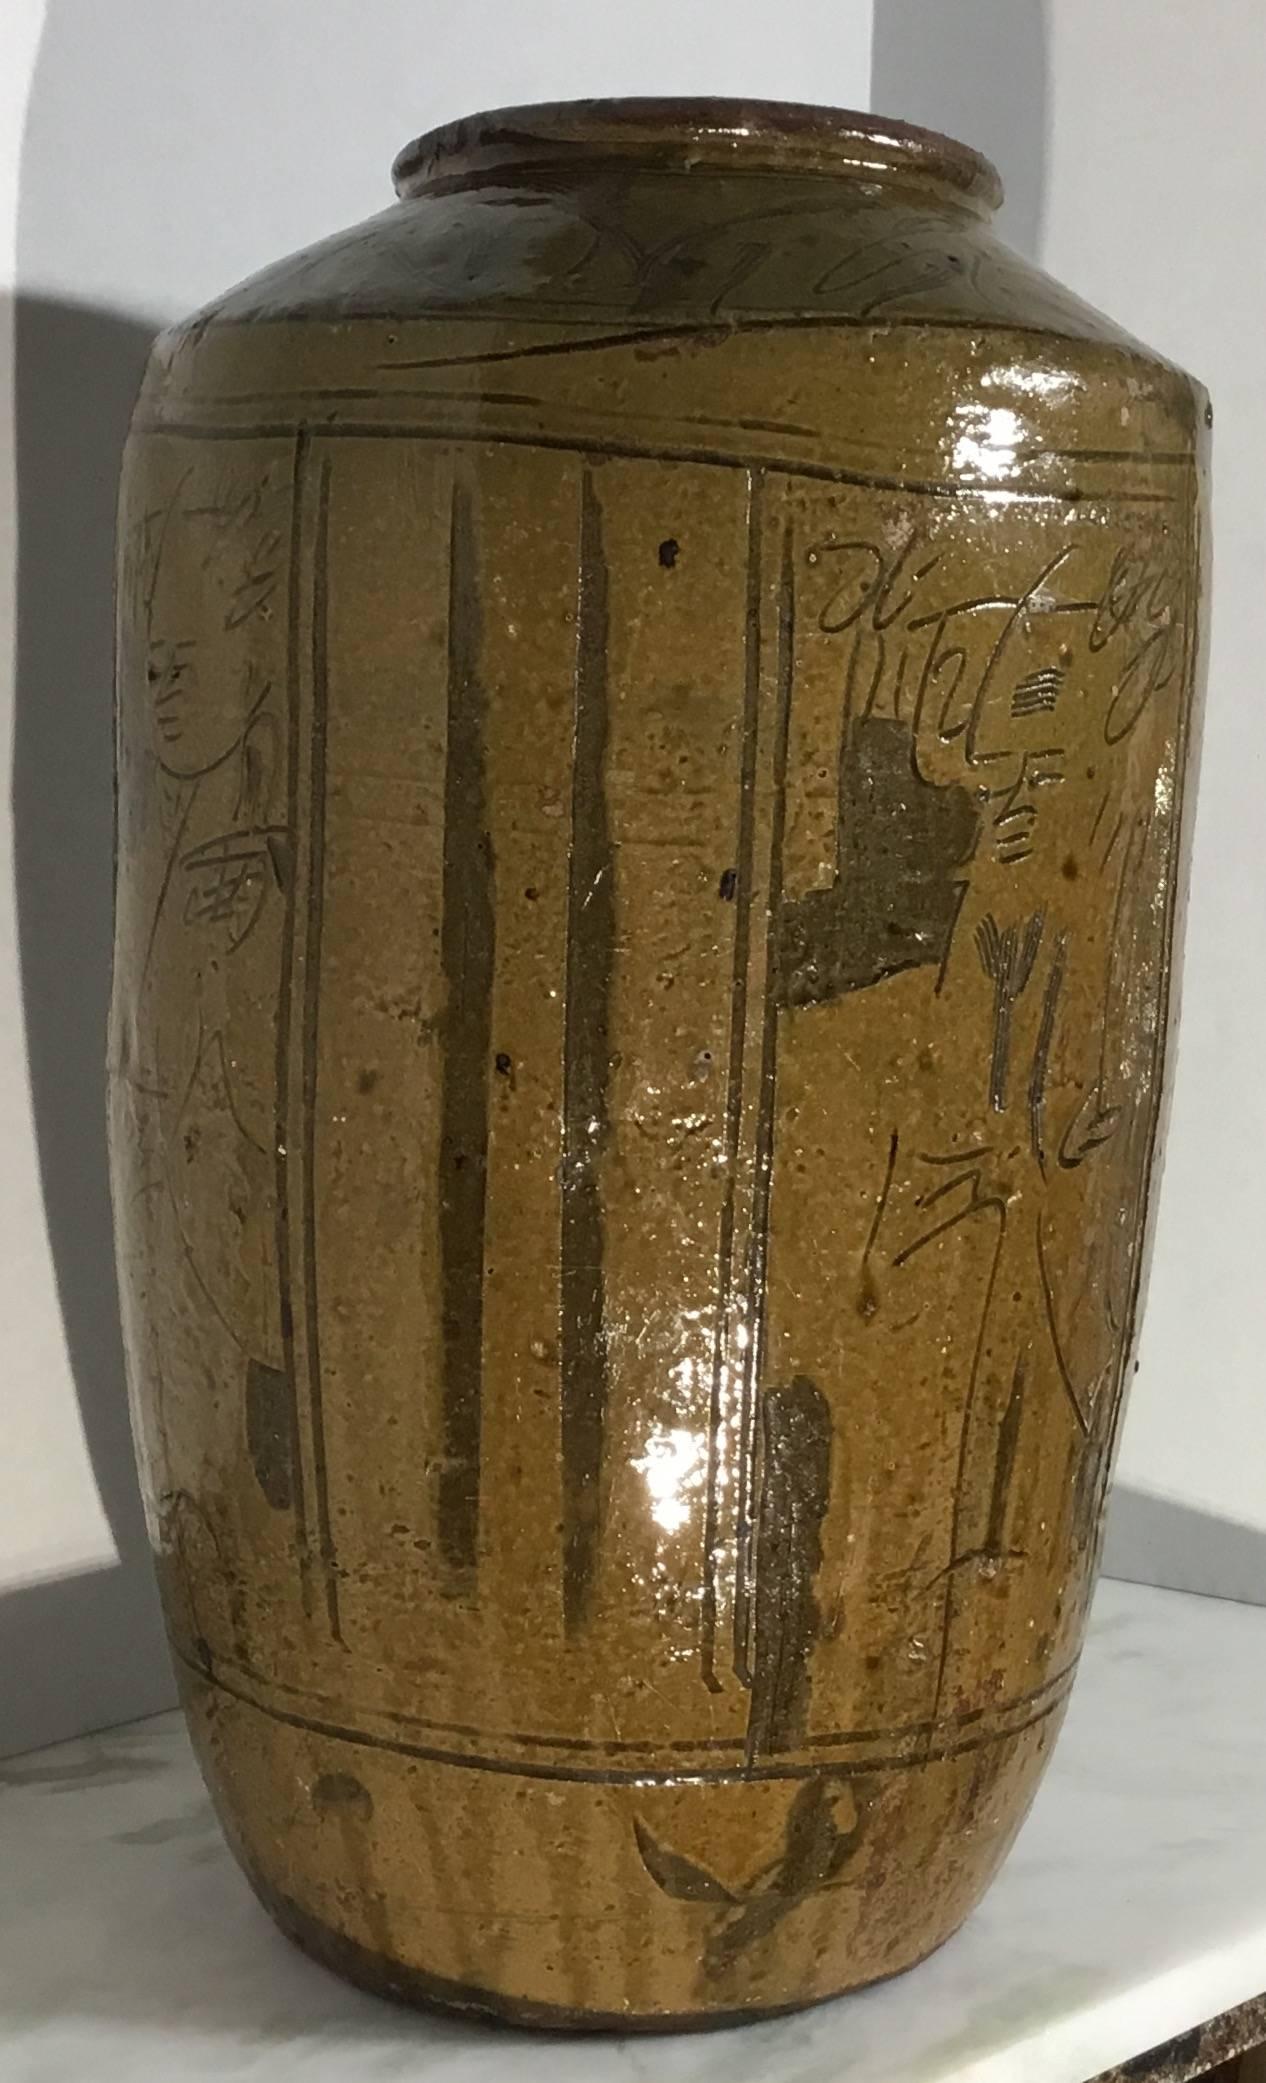 Elegant Chinese stoneware vase with muster greenish color. Artistically press
and painted of faces that look interesting and decorative.
Vessel like this used as storage for fruit spices wine and water.
Has some imperfections while glazing.